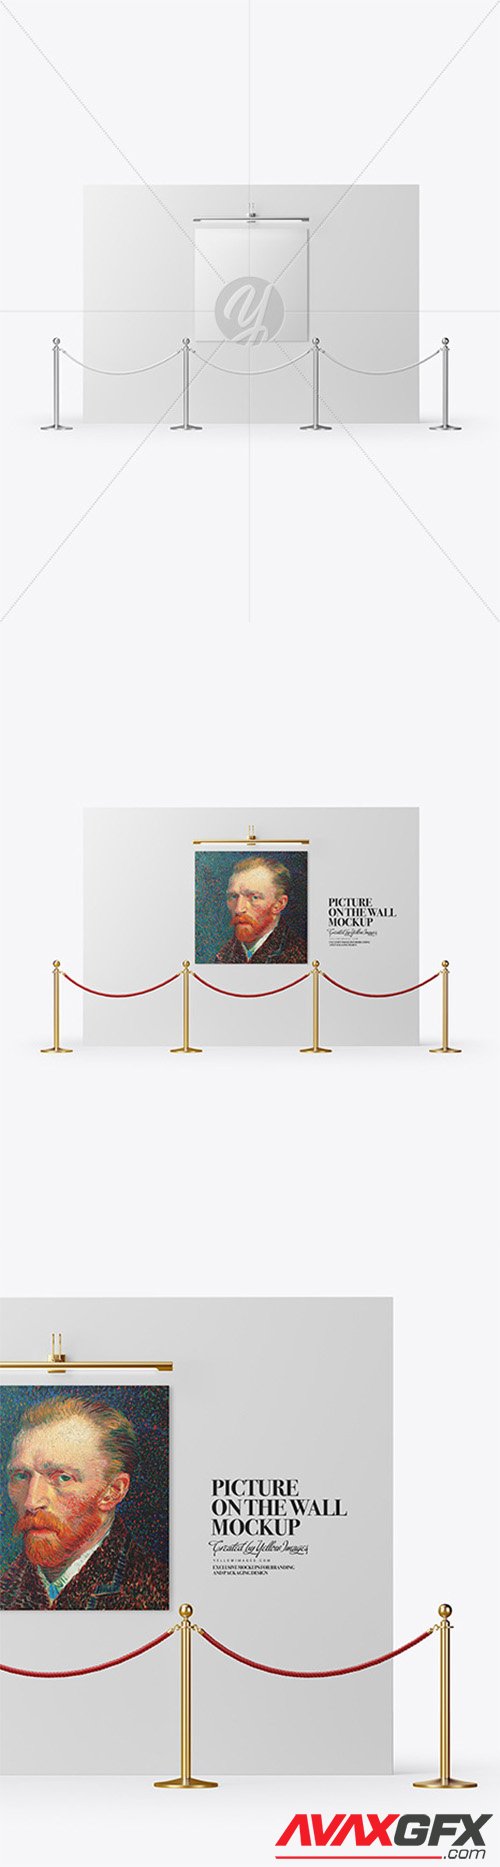 Canvas Picture on the Wall Mockup 82035